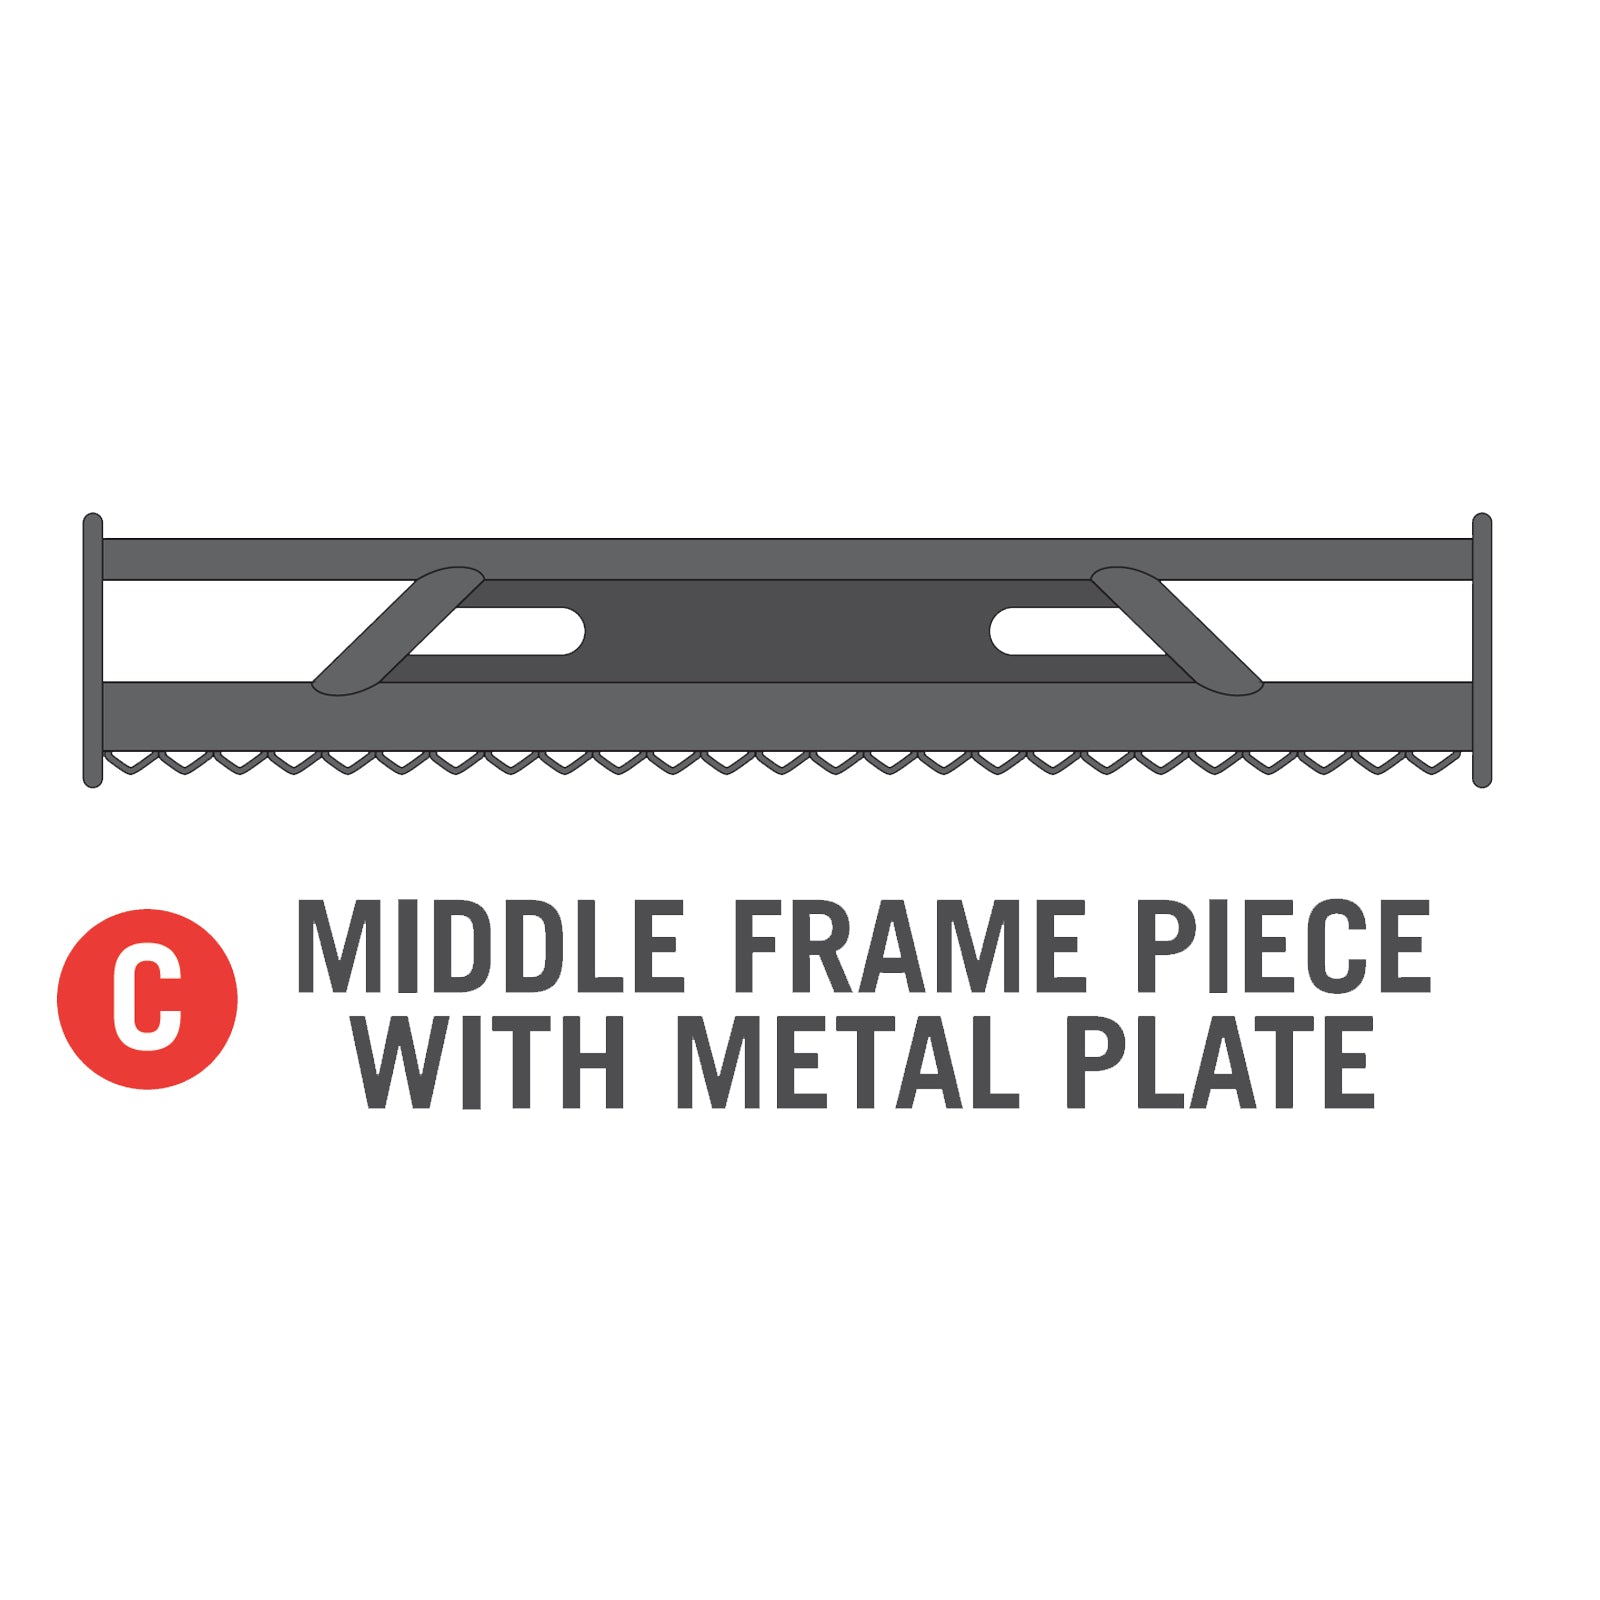 Middle Frame Piece W/Metal Plate for 11x16 foot Horizon Trampoline (Part C).